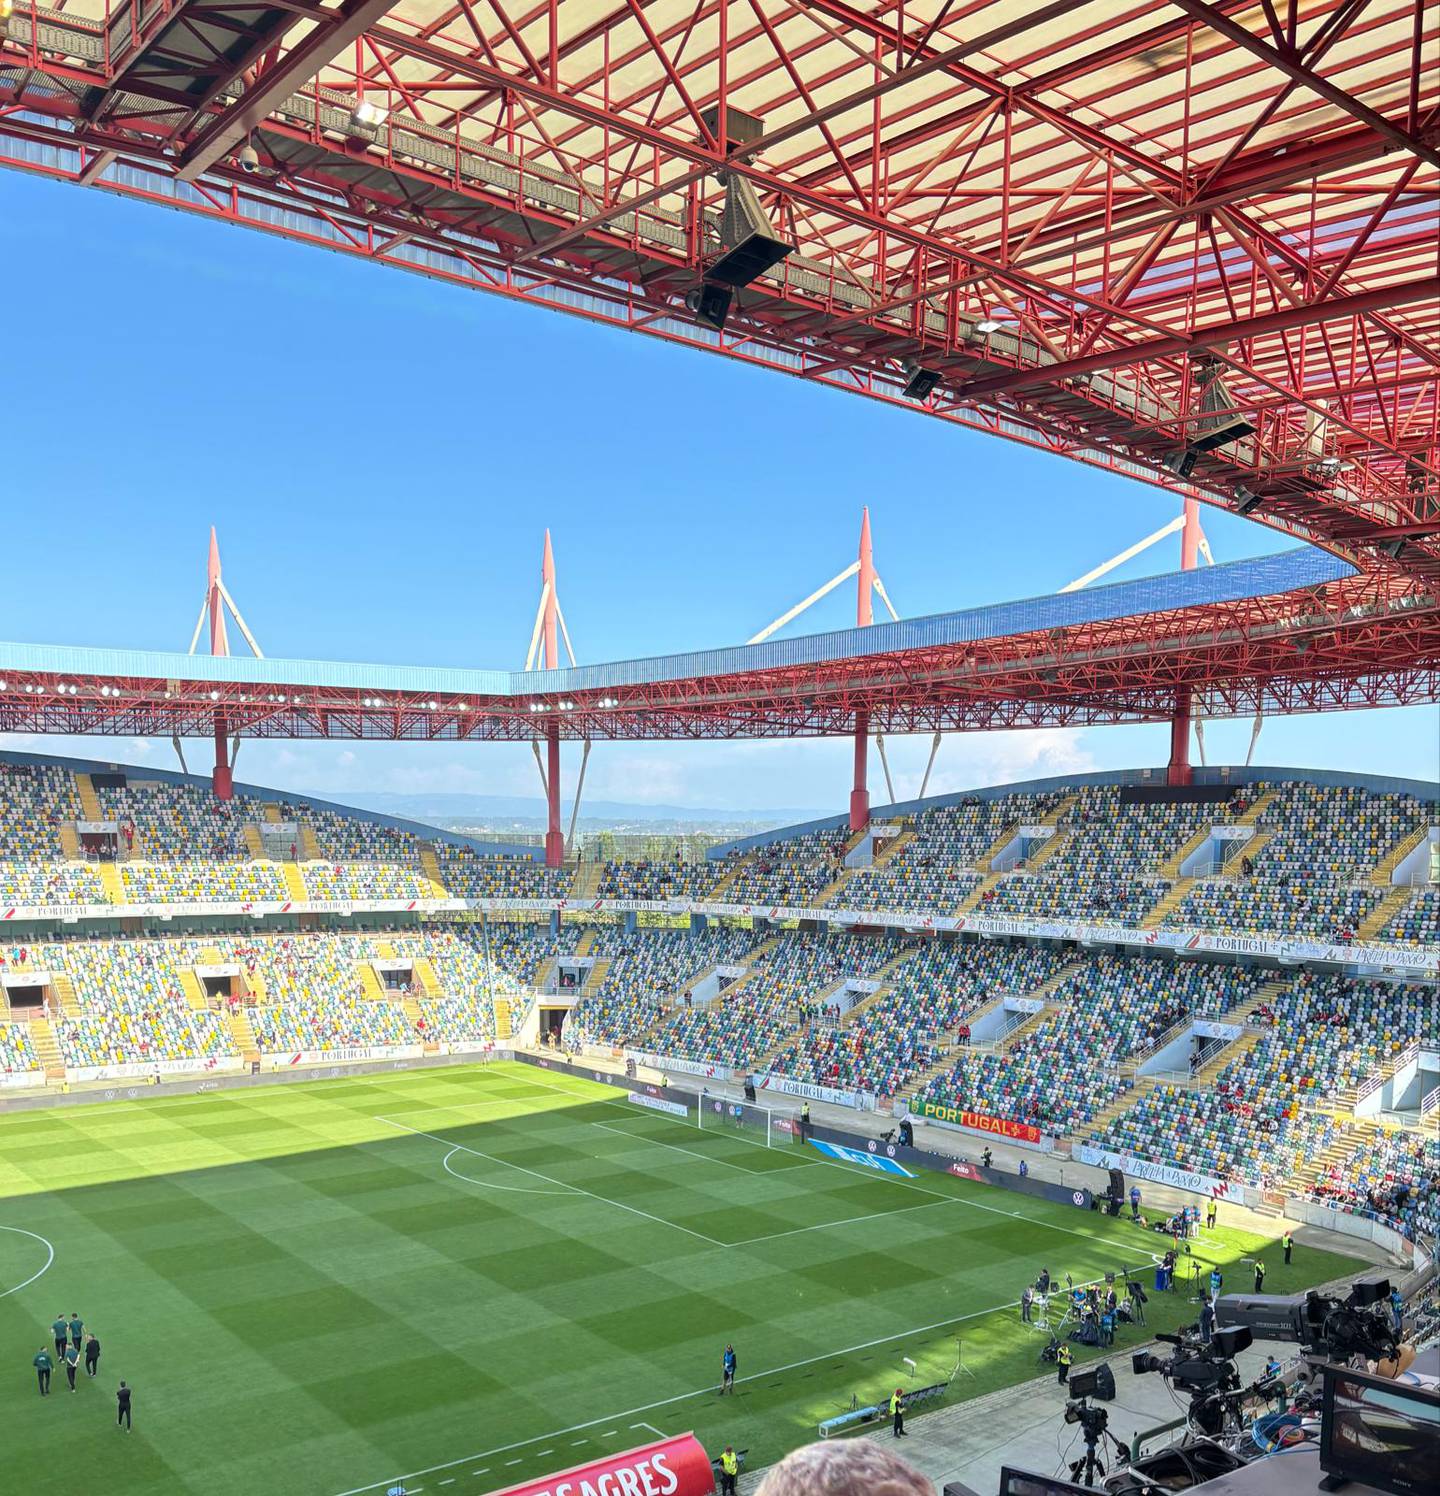 A view of the stadium where Ireland take on Portugal.